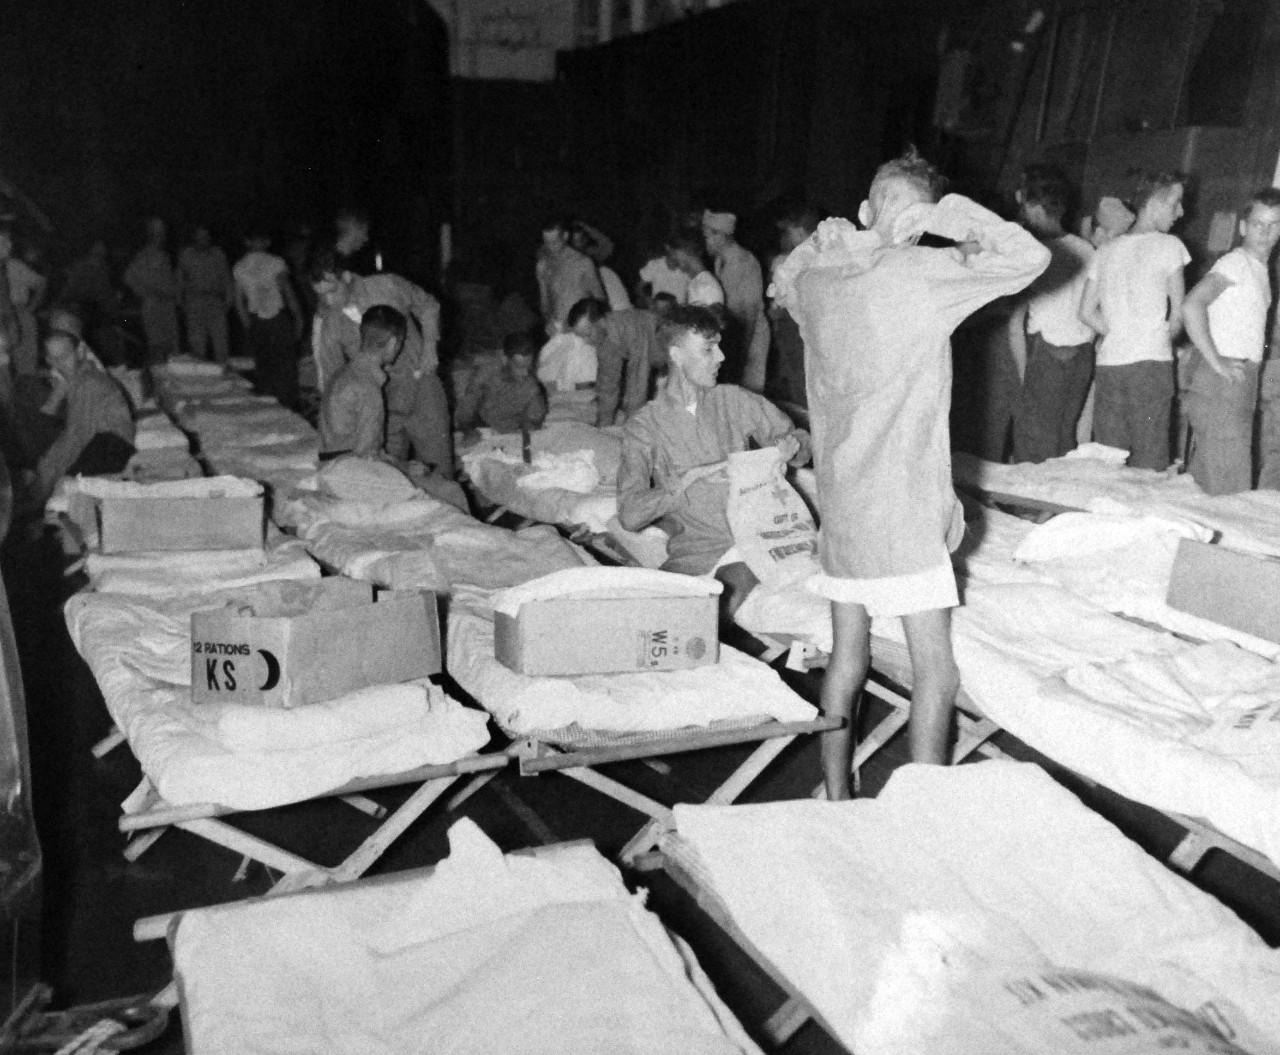 80-G-343551:    Allied Prisoner of War, Formosa, 1945.  Liberated British and Australian prisoners from a Formosan prison camp revel in clean clothes, cots, Red Cross kits, and a friendly welcome on board their rescue ship, USS Block Island (CVE 106).   Photographed by Photographer’s Mate First Class T.K. Brett, September 5, 1945.   Official U.S. Navy photograph, now in the collection of the National Archives.  (5/22/2014).   